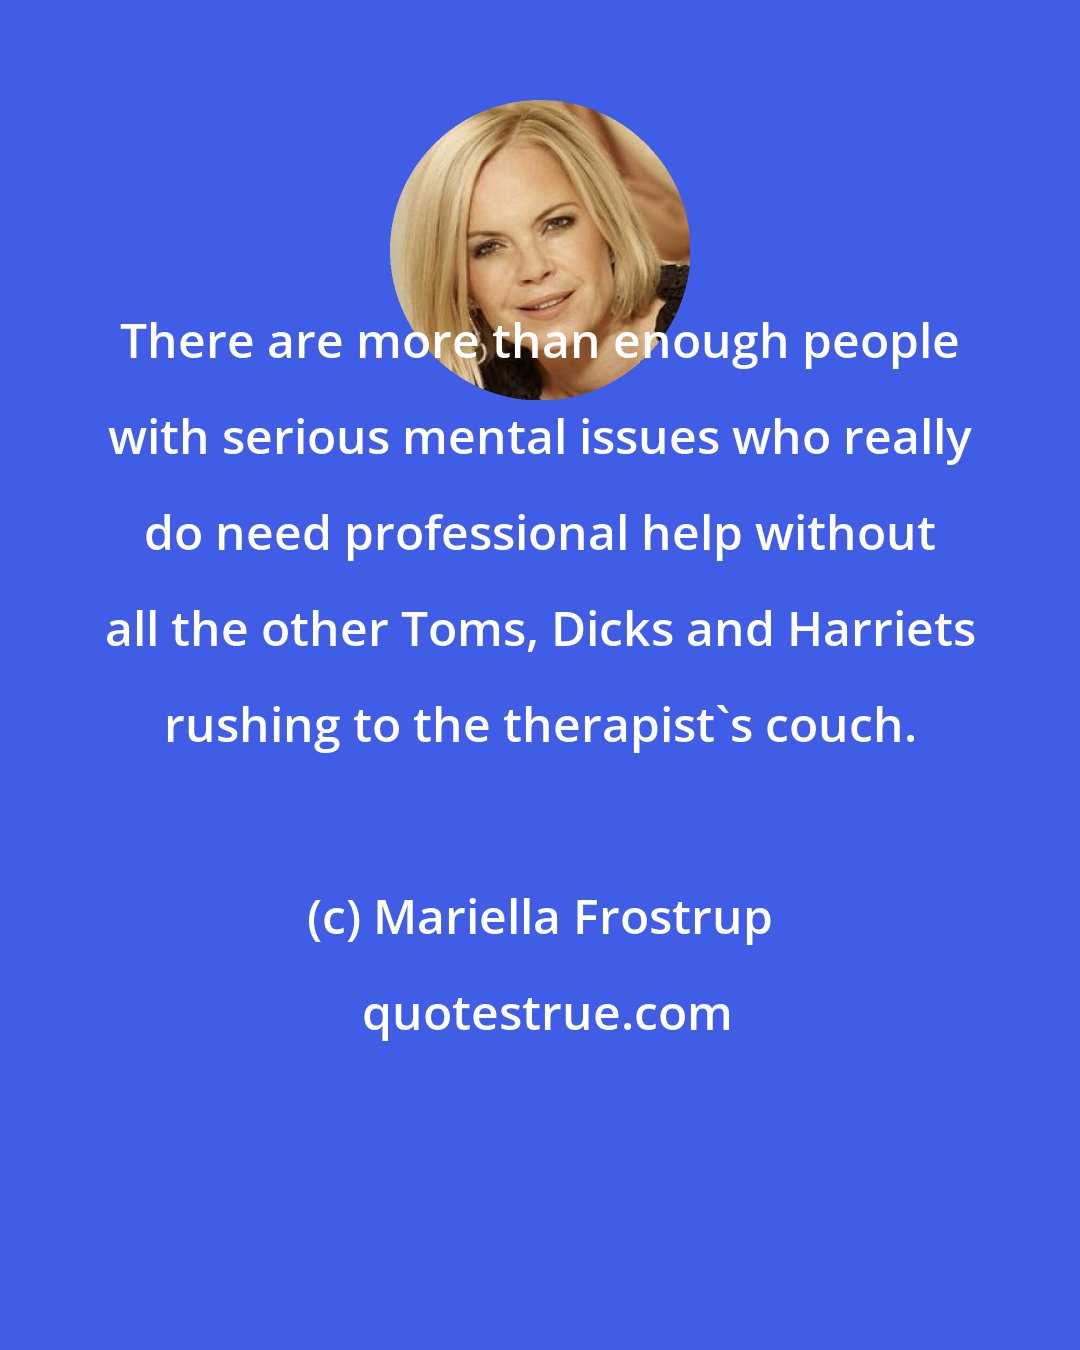 Mariella Frostrup: There are more than enough people with serious mental issues who really do need professional help without all the other Toms, Dicks and Harriets rushing to the therapist's couch.